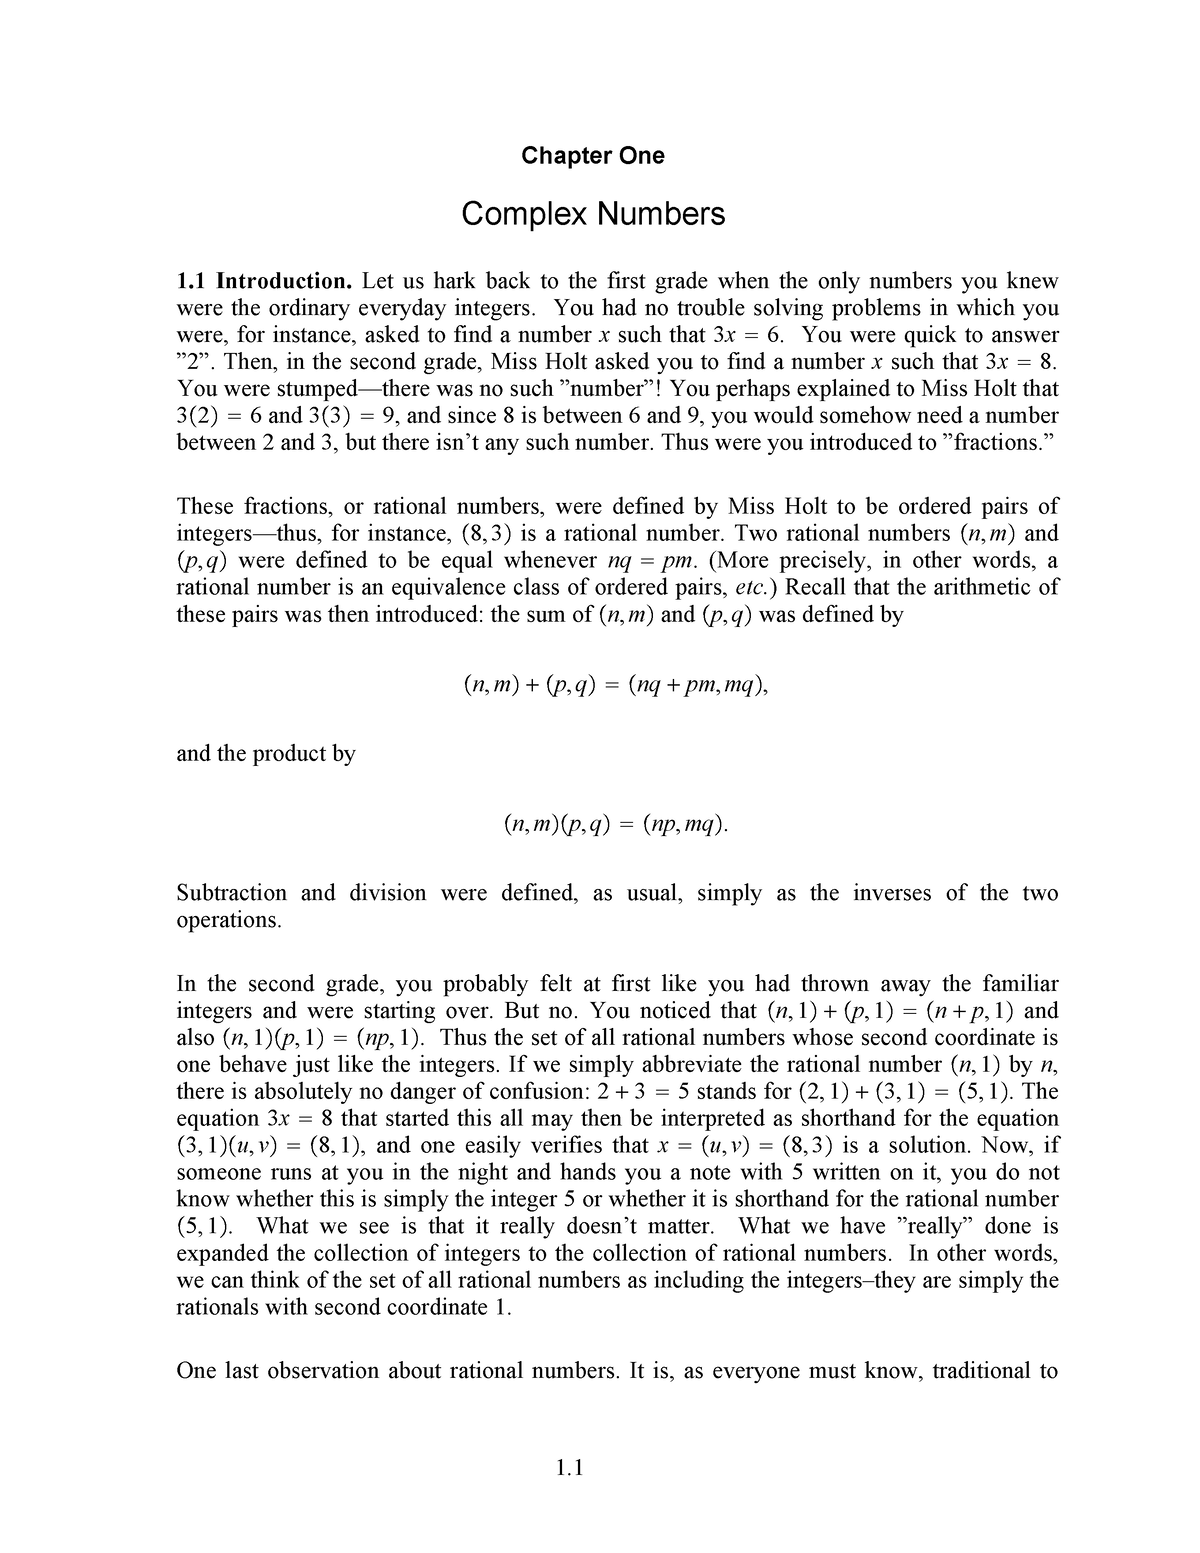 ch1-litteratur-chapter-one-complex-numbers-1-introduction-let-us